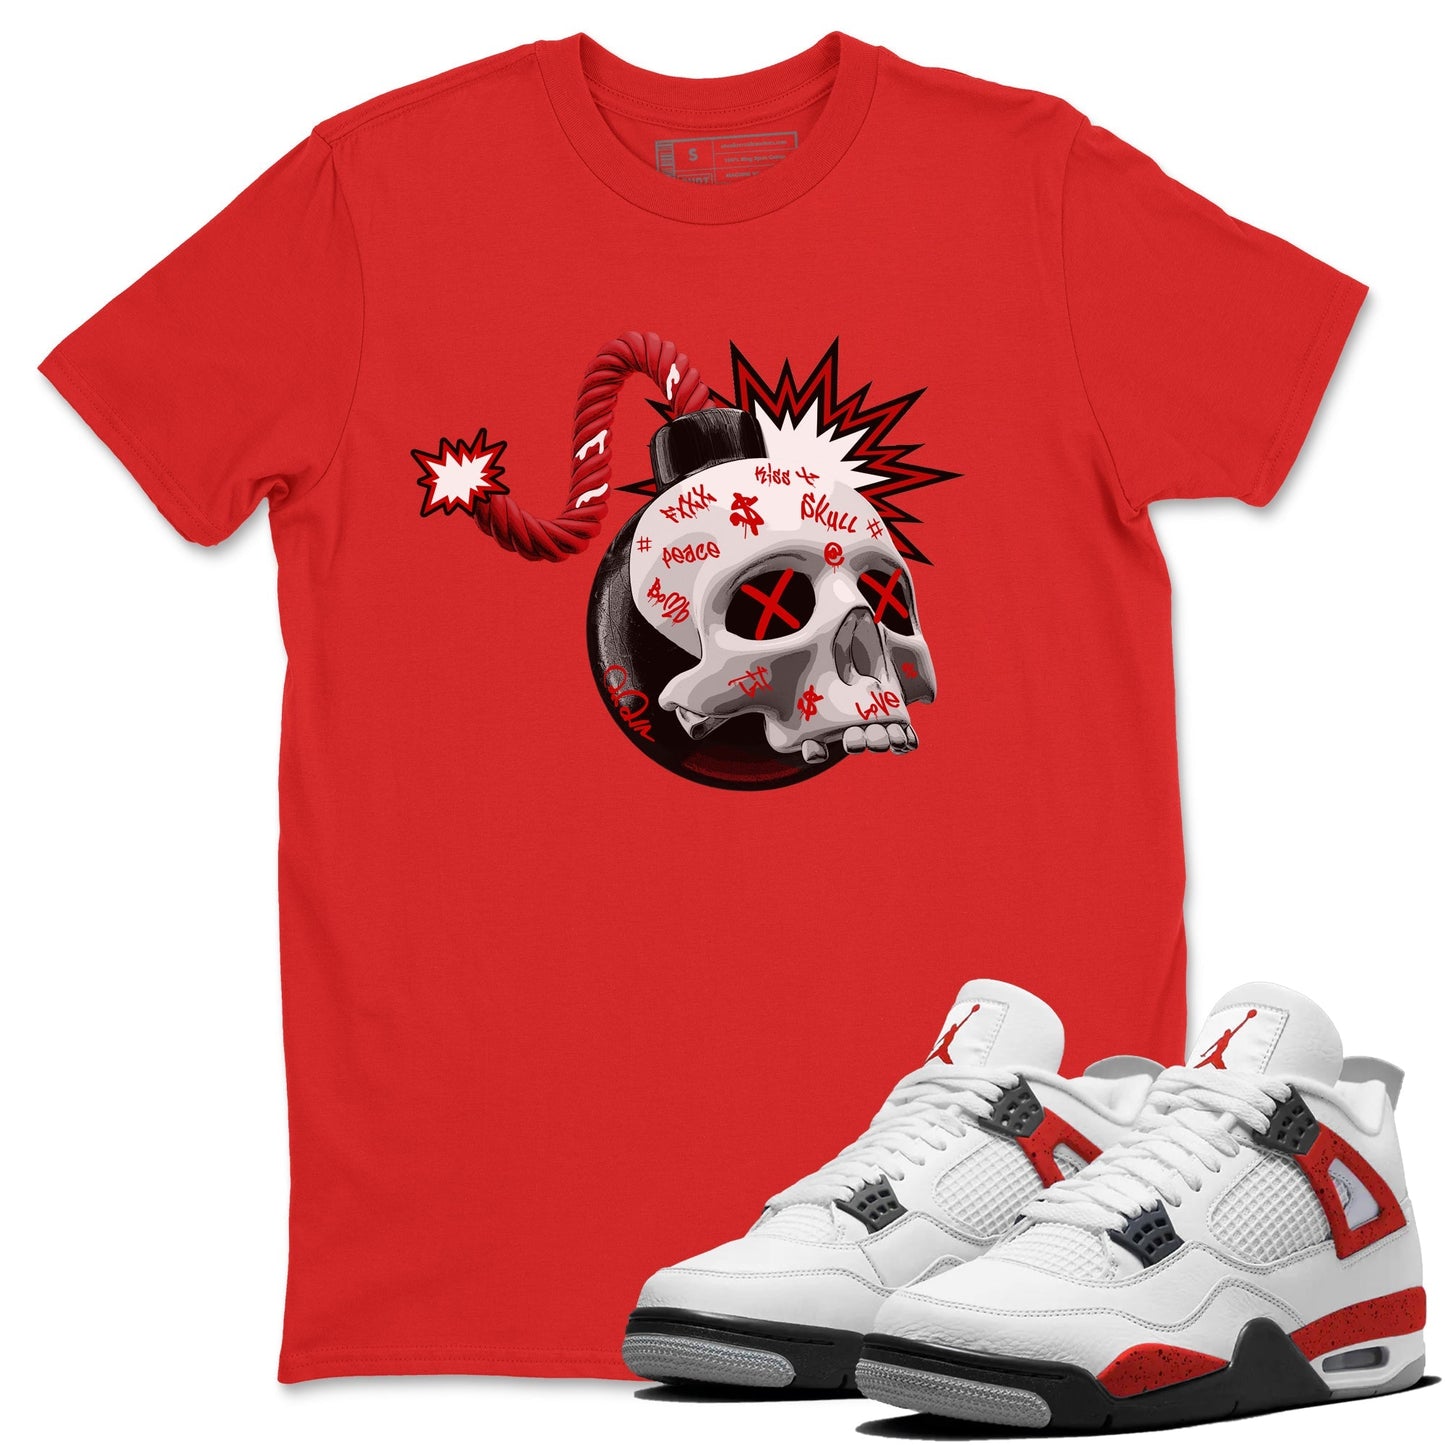 Air Jordan 4 Red Cement Sneaker Match Tees Skull Bomb Sneaker Tees AJ4 Retro OG Red Cement Sneaker Release Tees Unisex Shirts Red 1